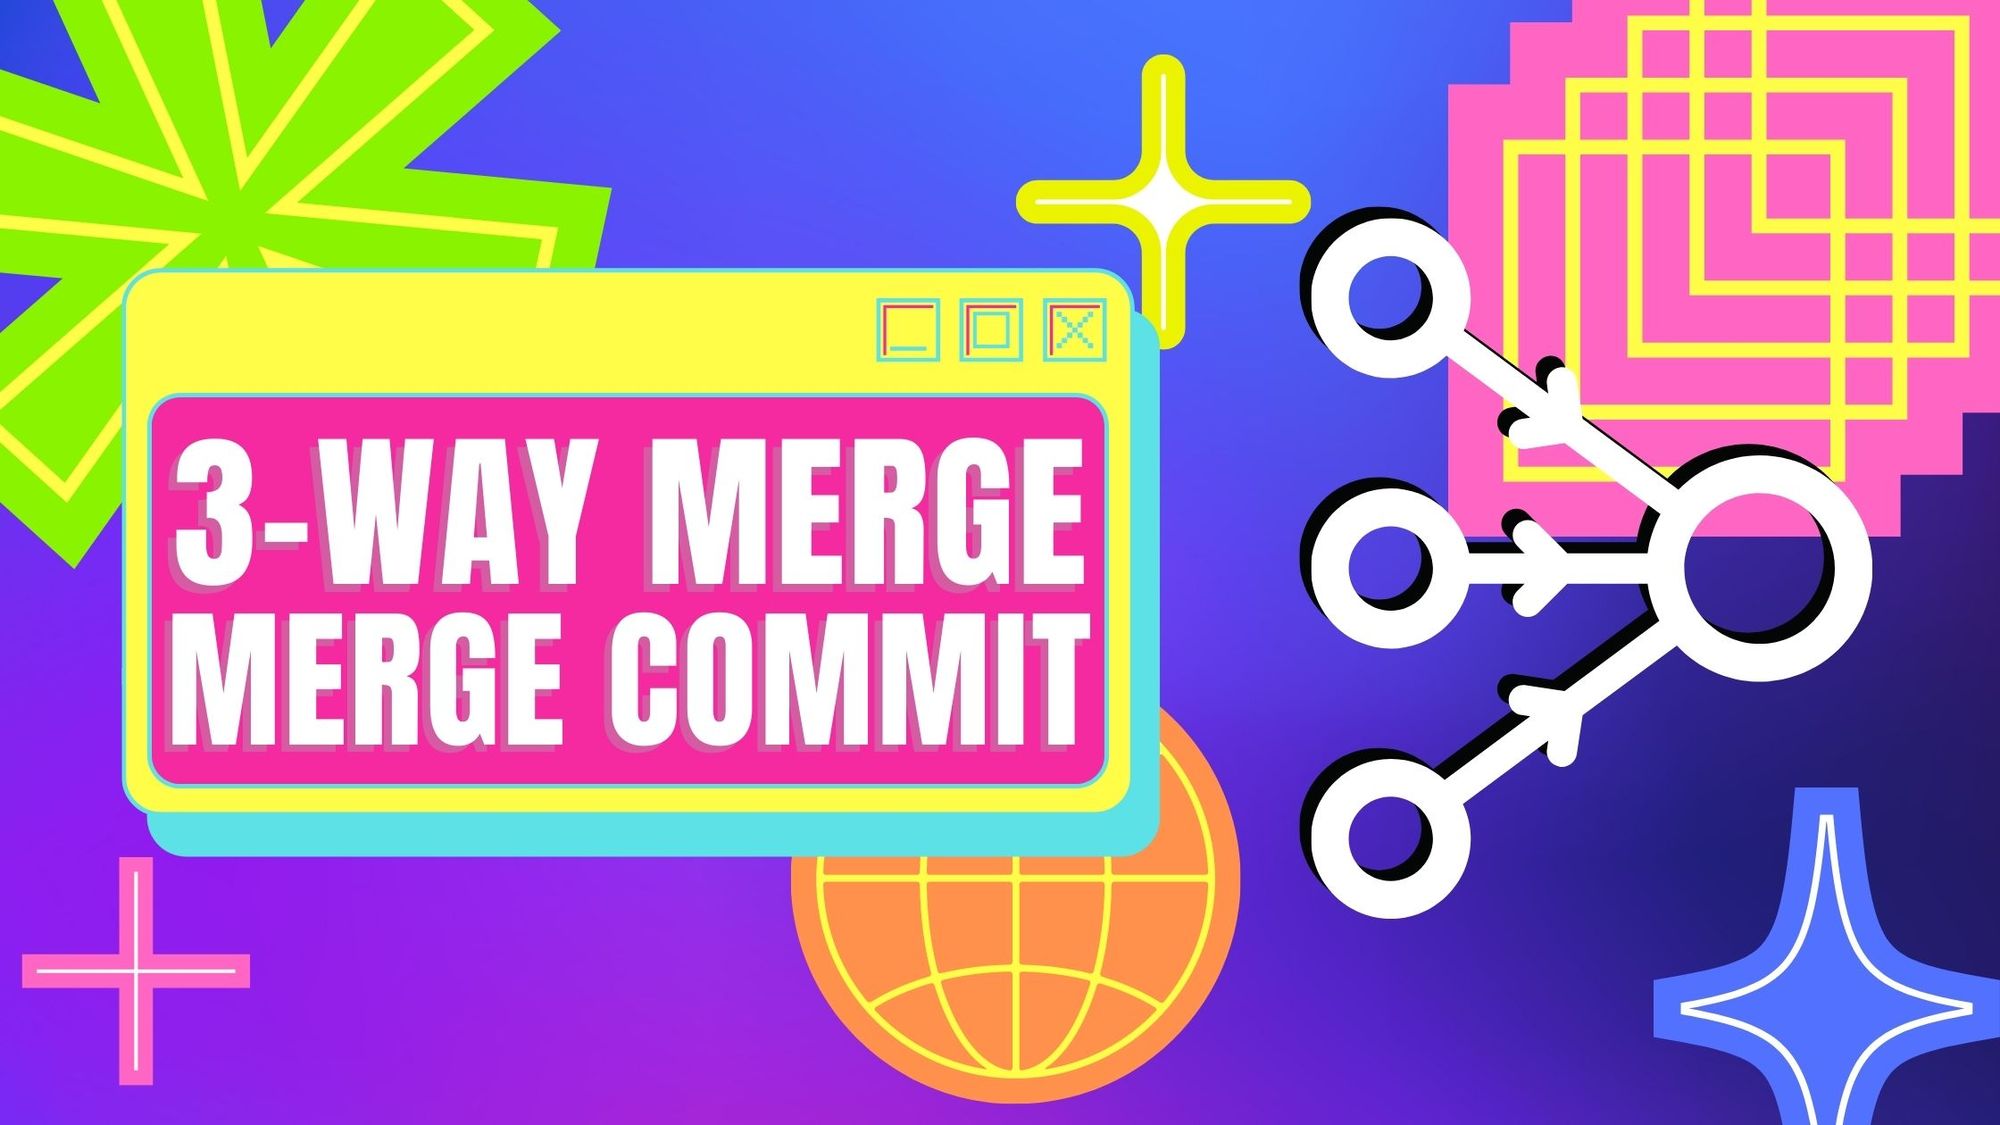 3-Way Merge or Merge Commit: Why Is It Better Than a 2-Way Merge?